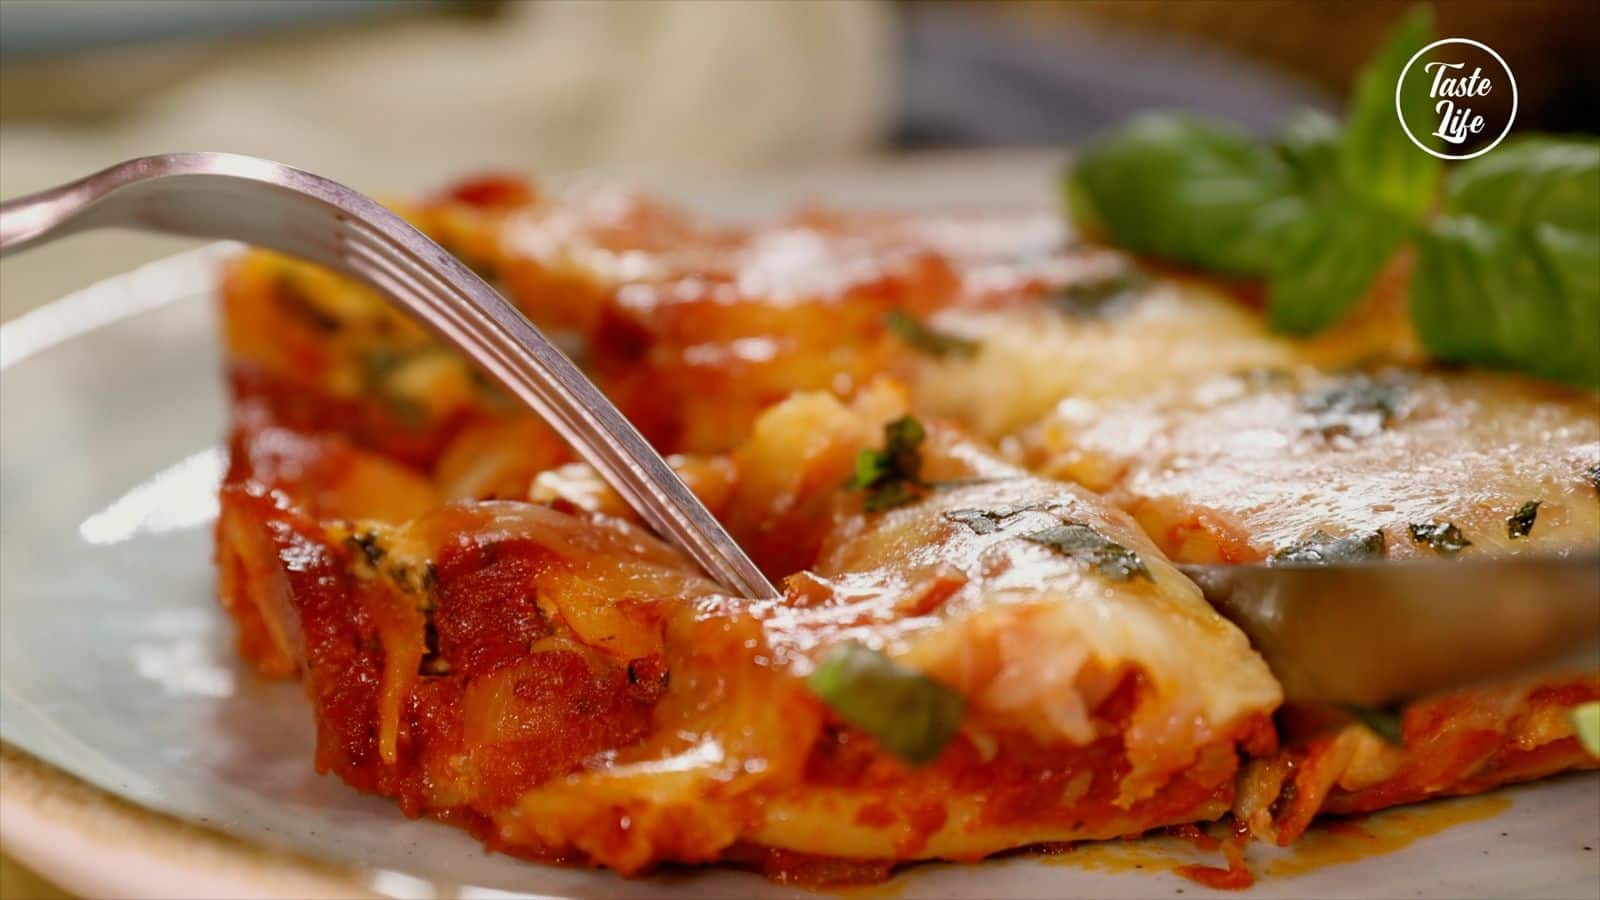 Guests coming over? Serve them this delicious Swiss chard cannelloni